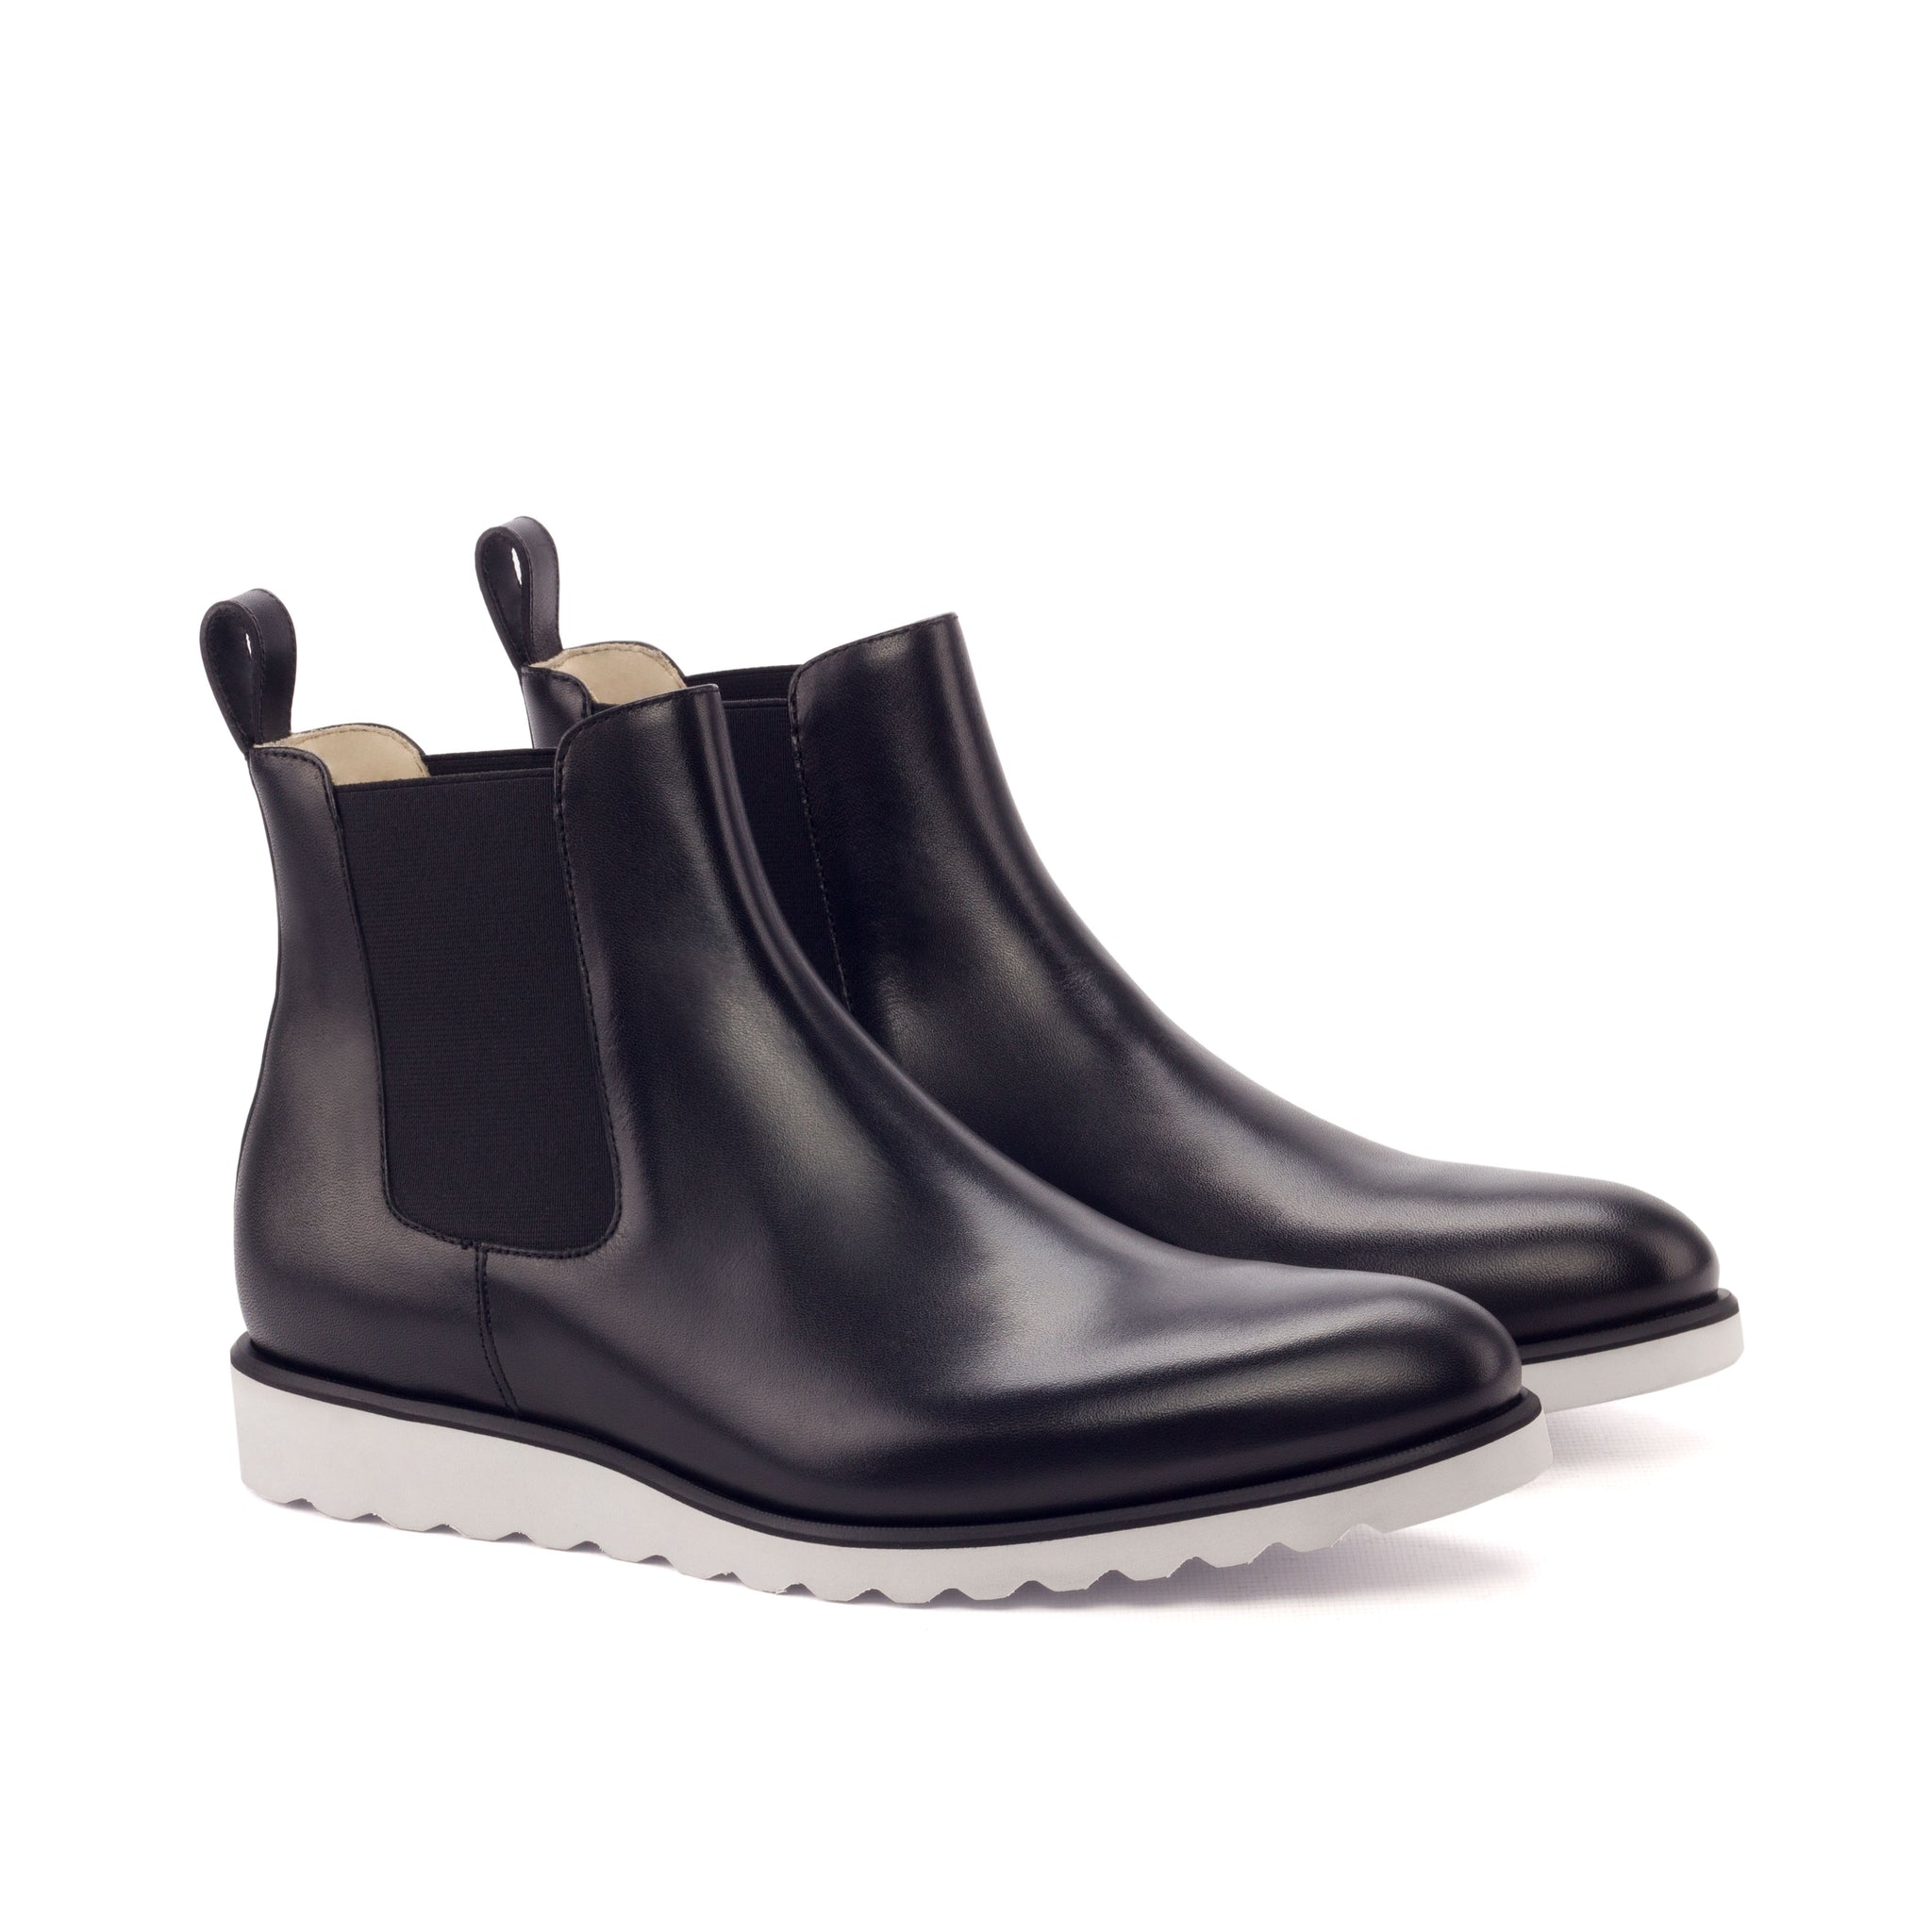 Unique Handcrafted Black Painted Calf Chelsea Boots w/ Sportwedge Sole